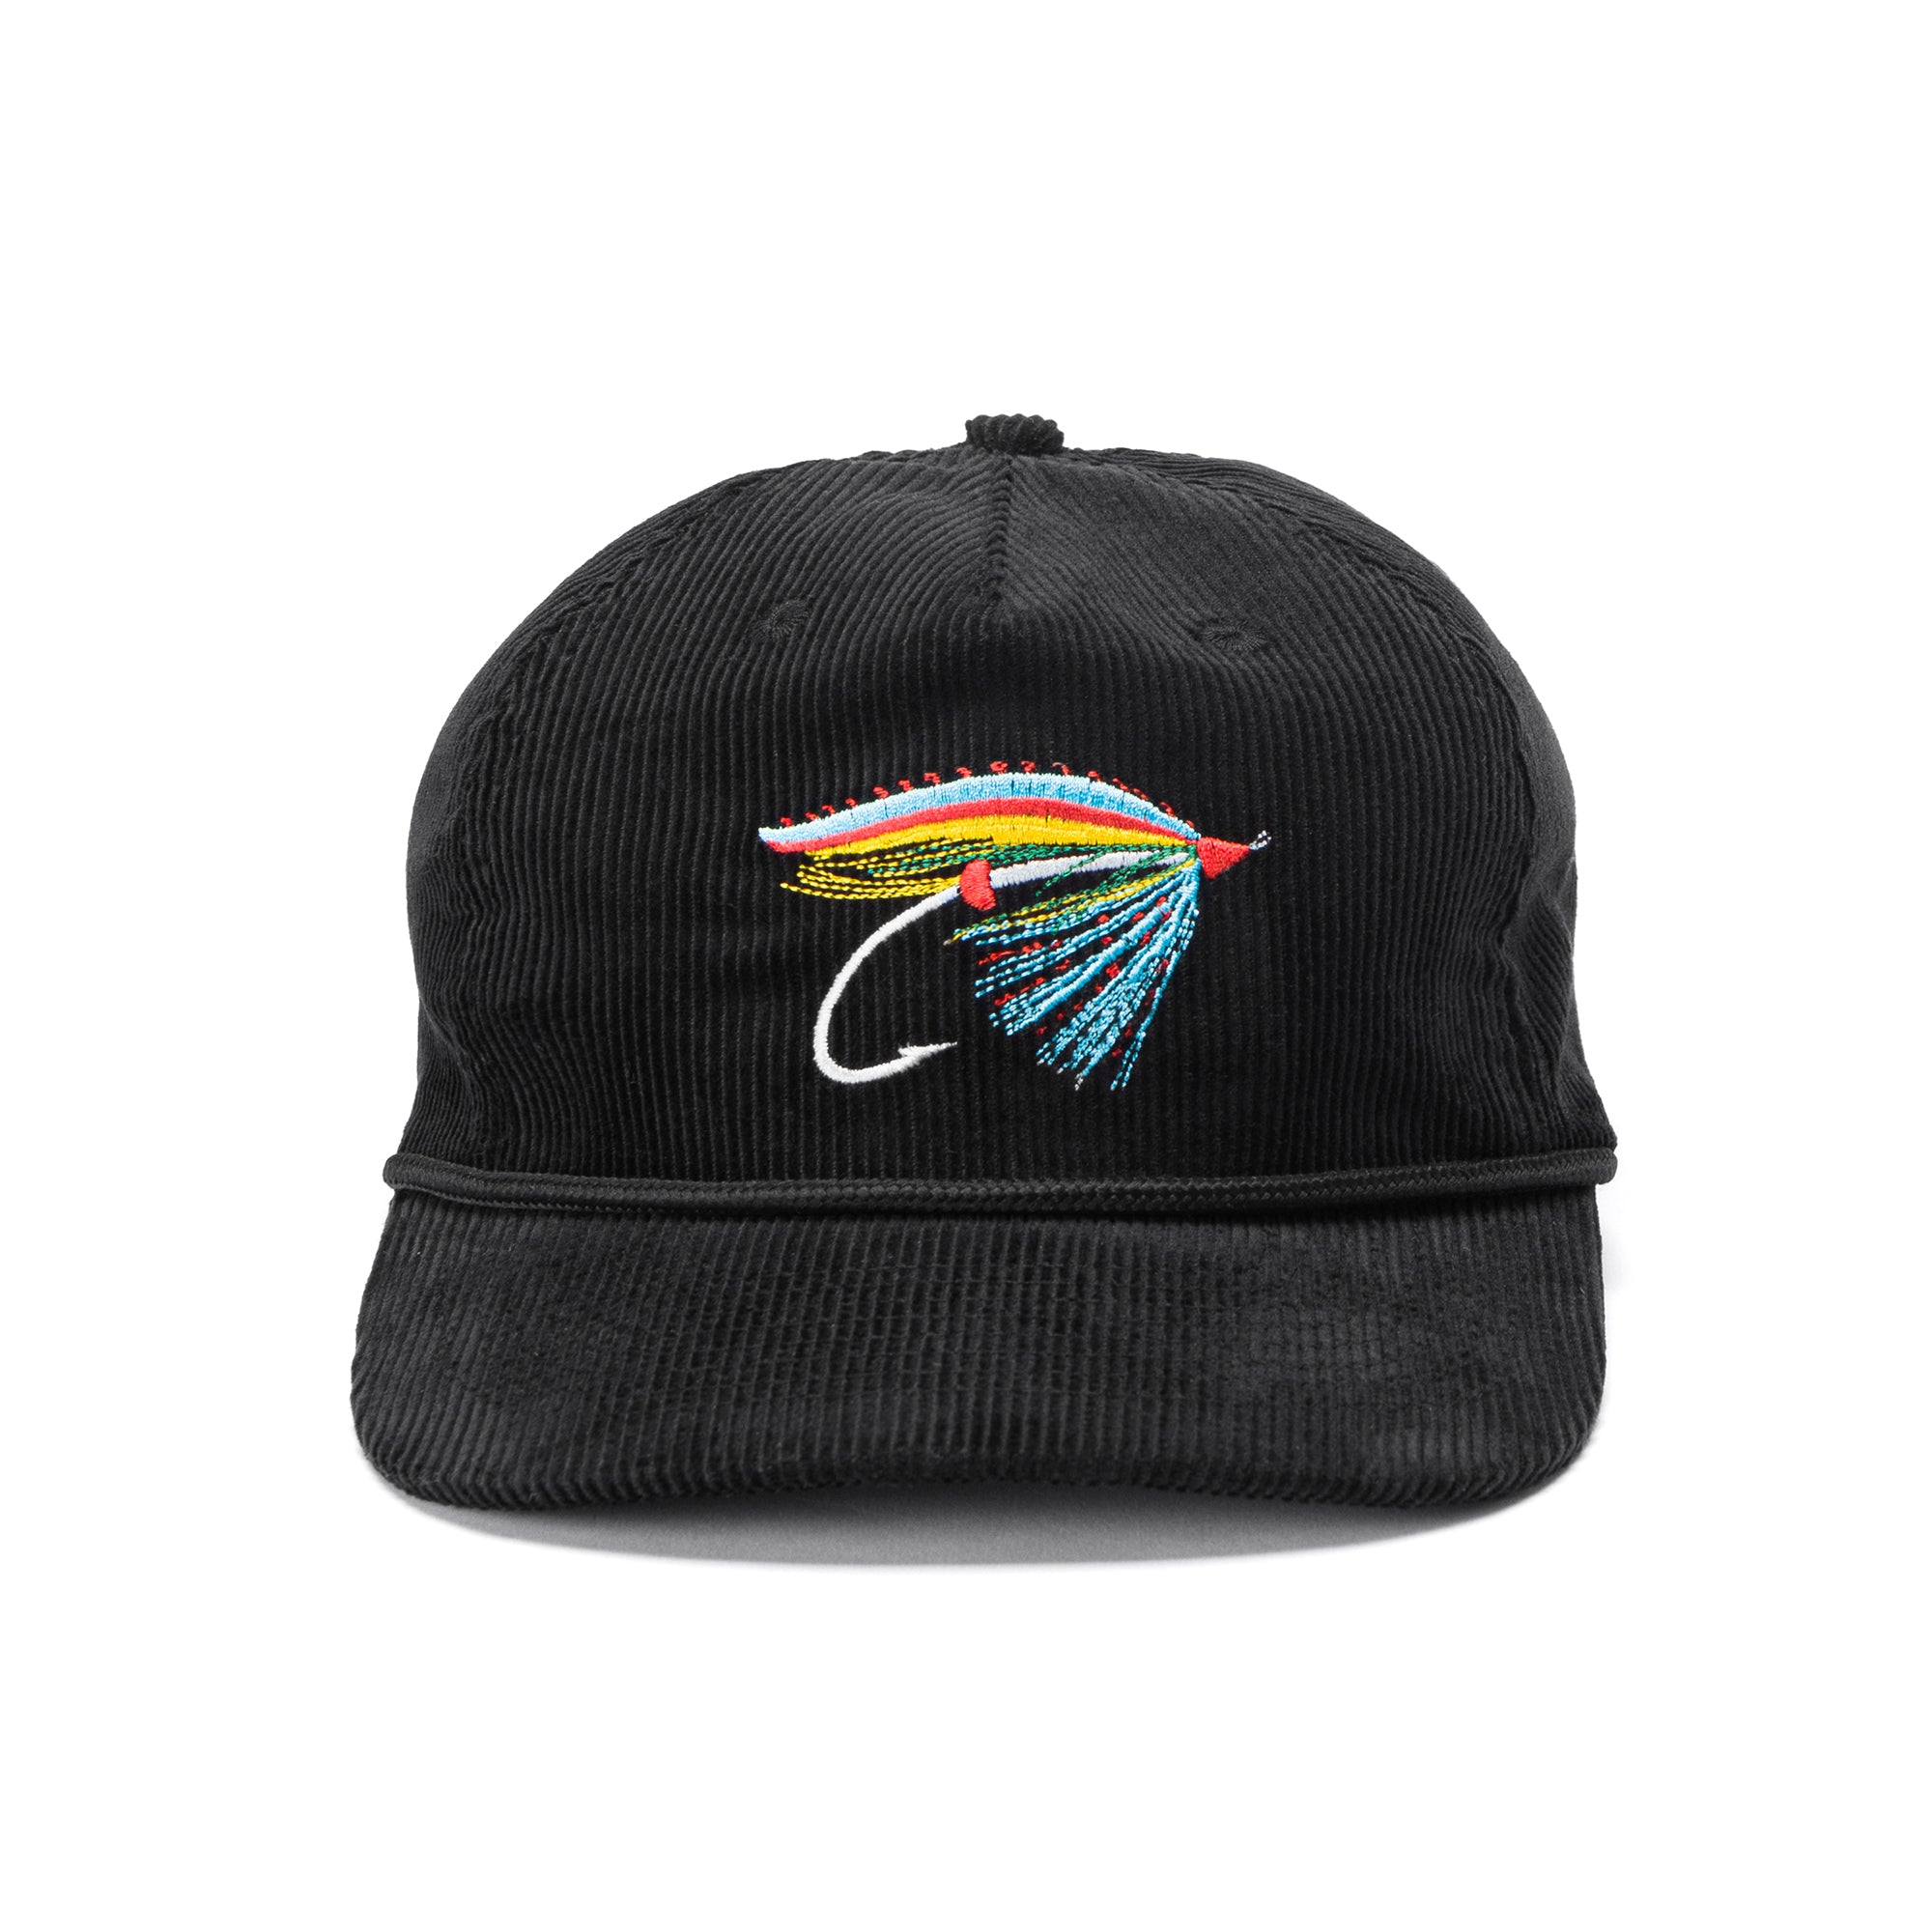 Seager x Flylords Dry Fly Corduroy Snapback Black